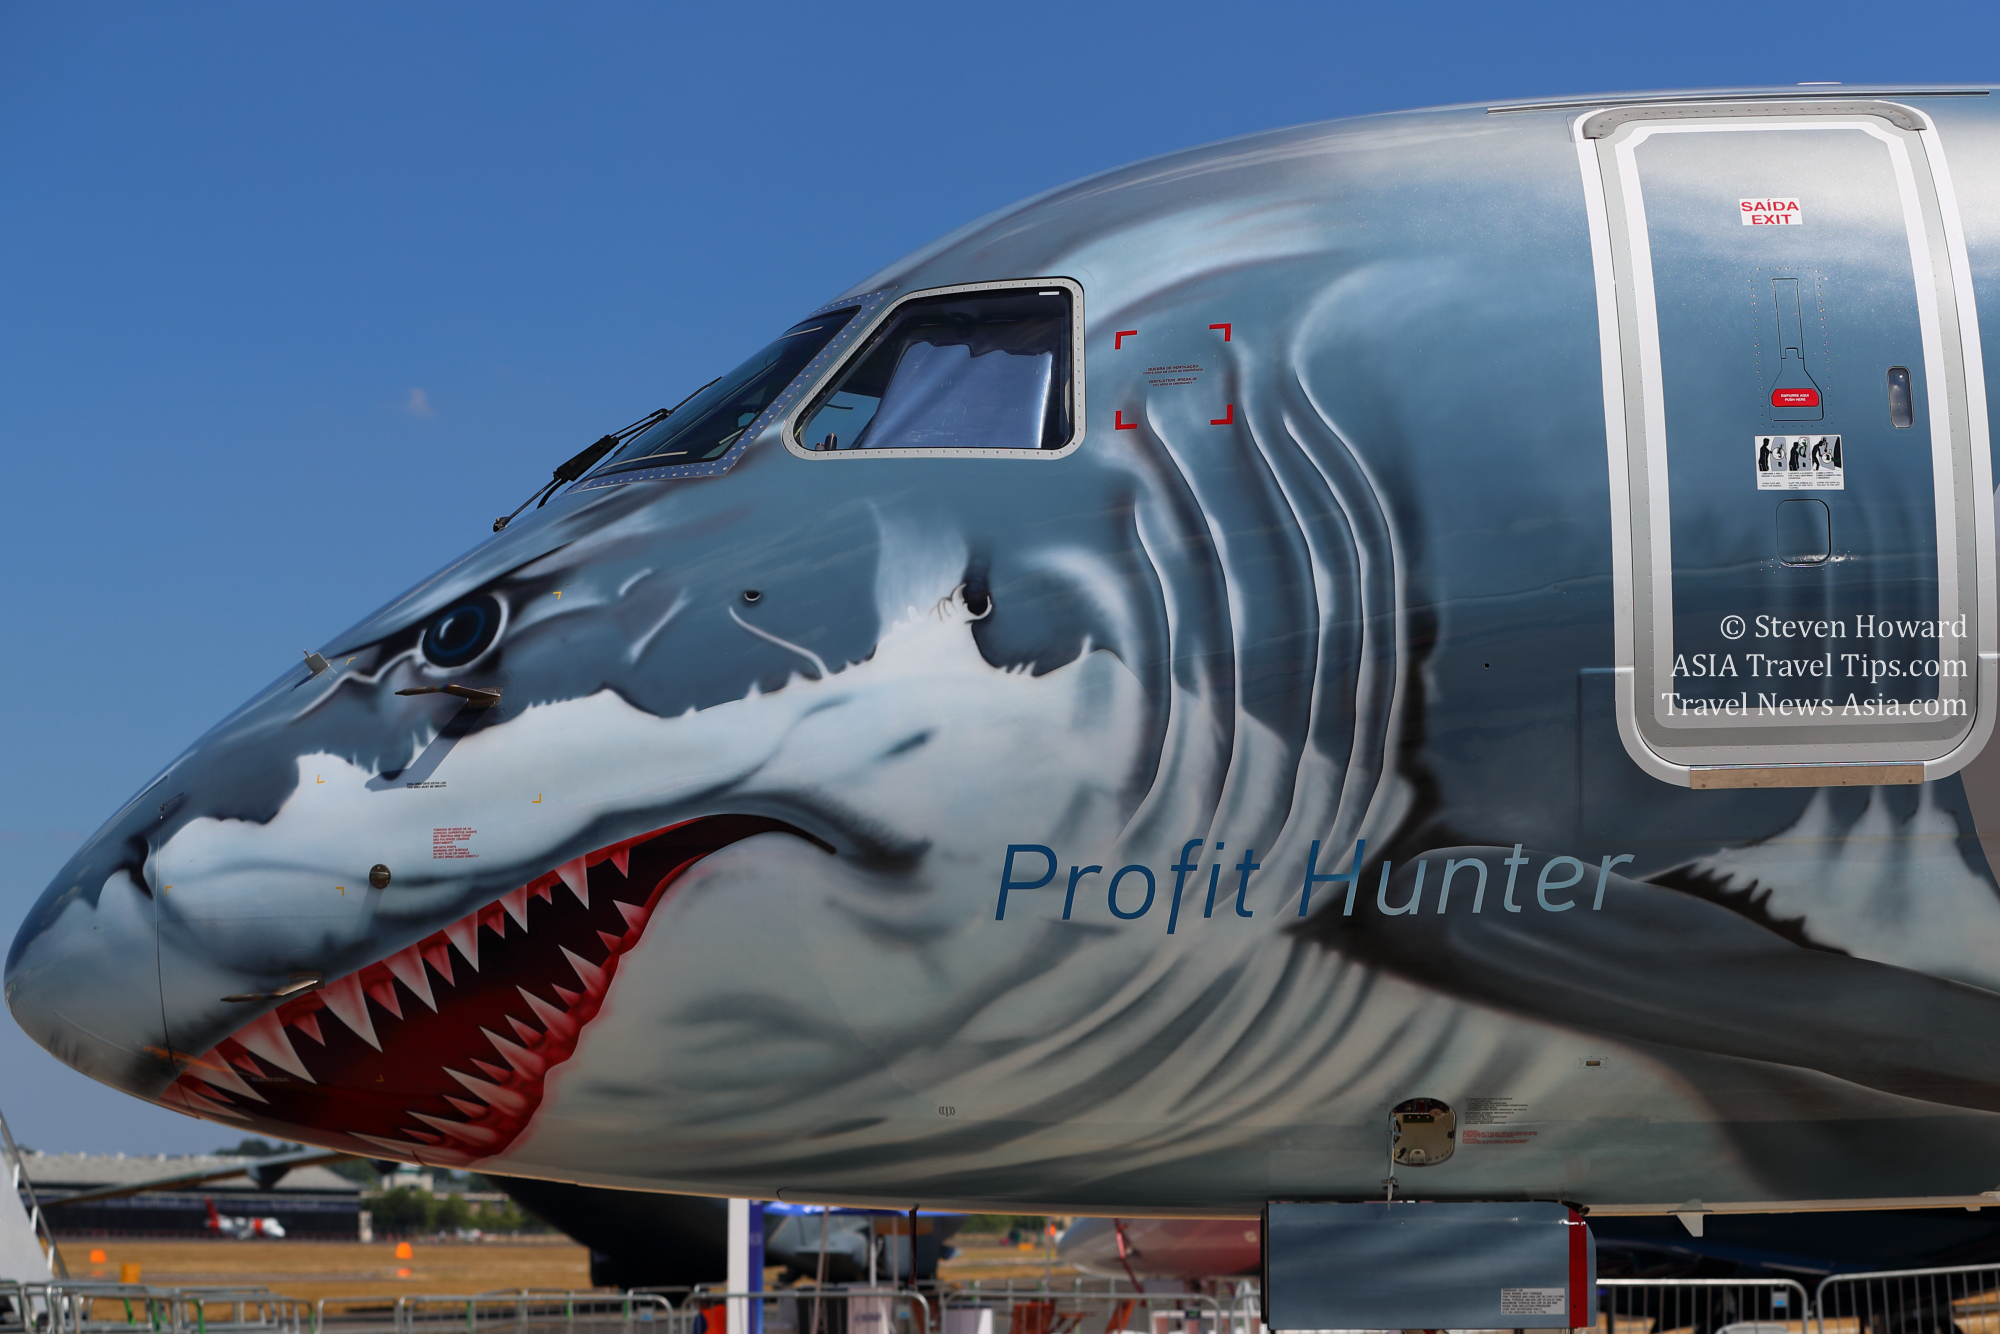 Embraer E190-E2 at Farnborough Airshow 2018. Picture by Steven Howard of TravelNewsAsia.com Click to enlarge.